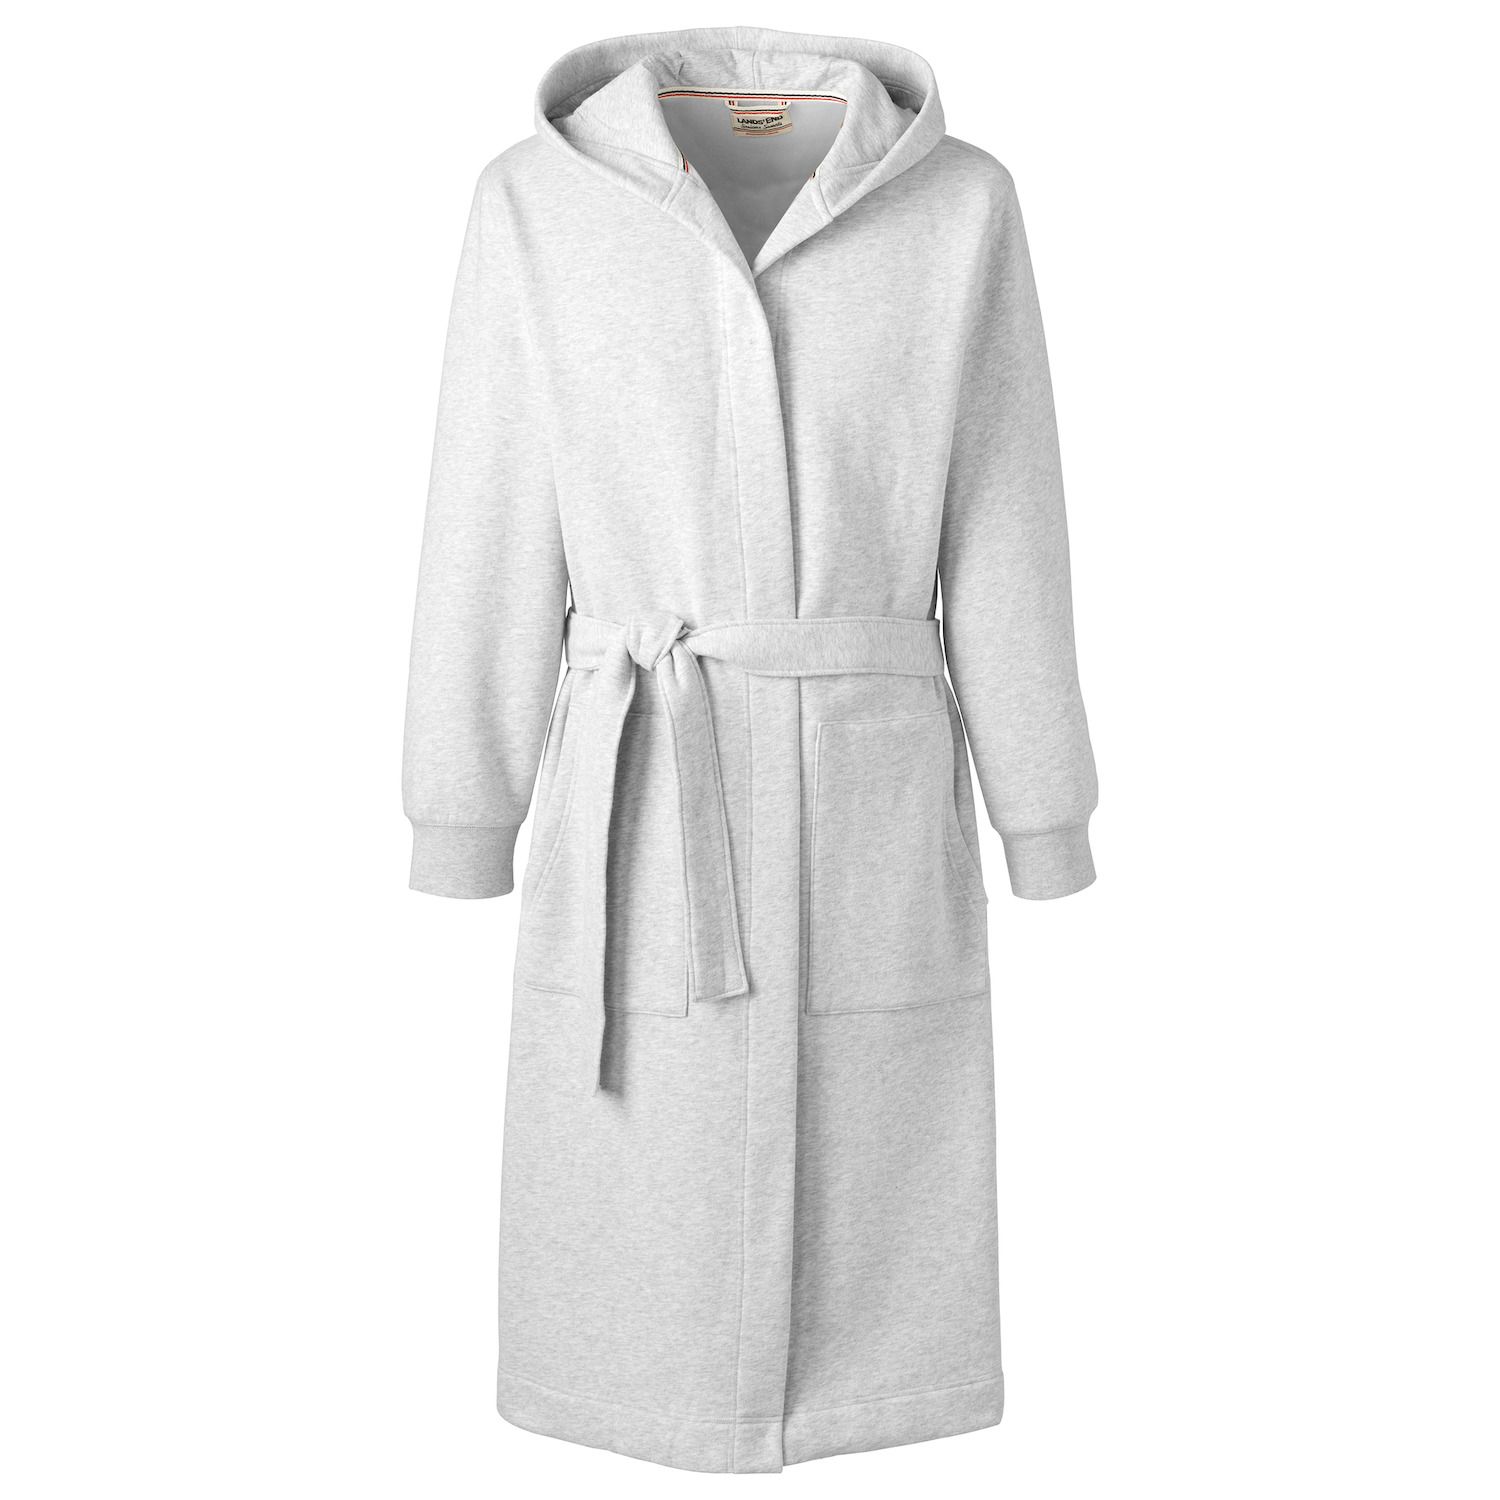 Image for Lands' End Men's Serious Sweats Robe at Kohl's.